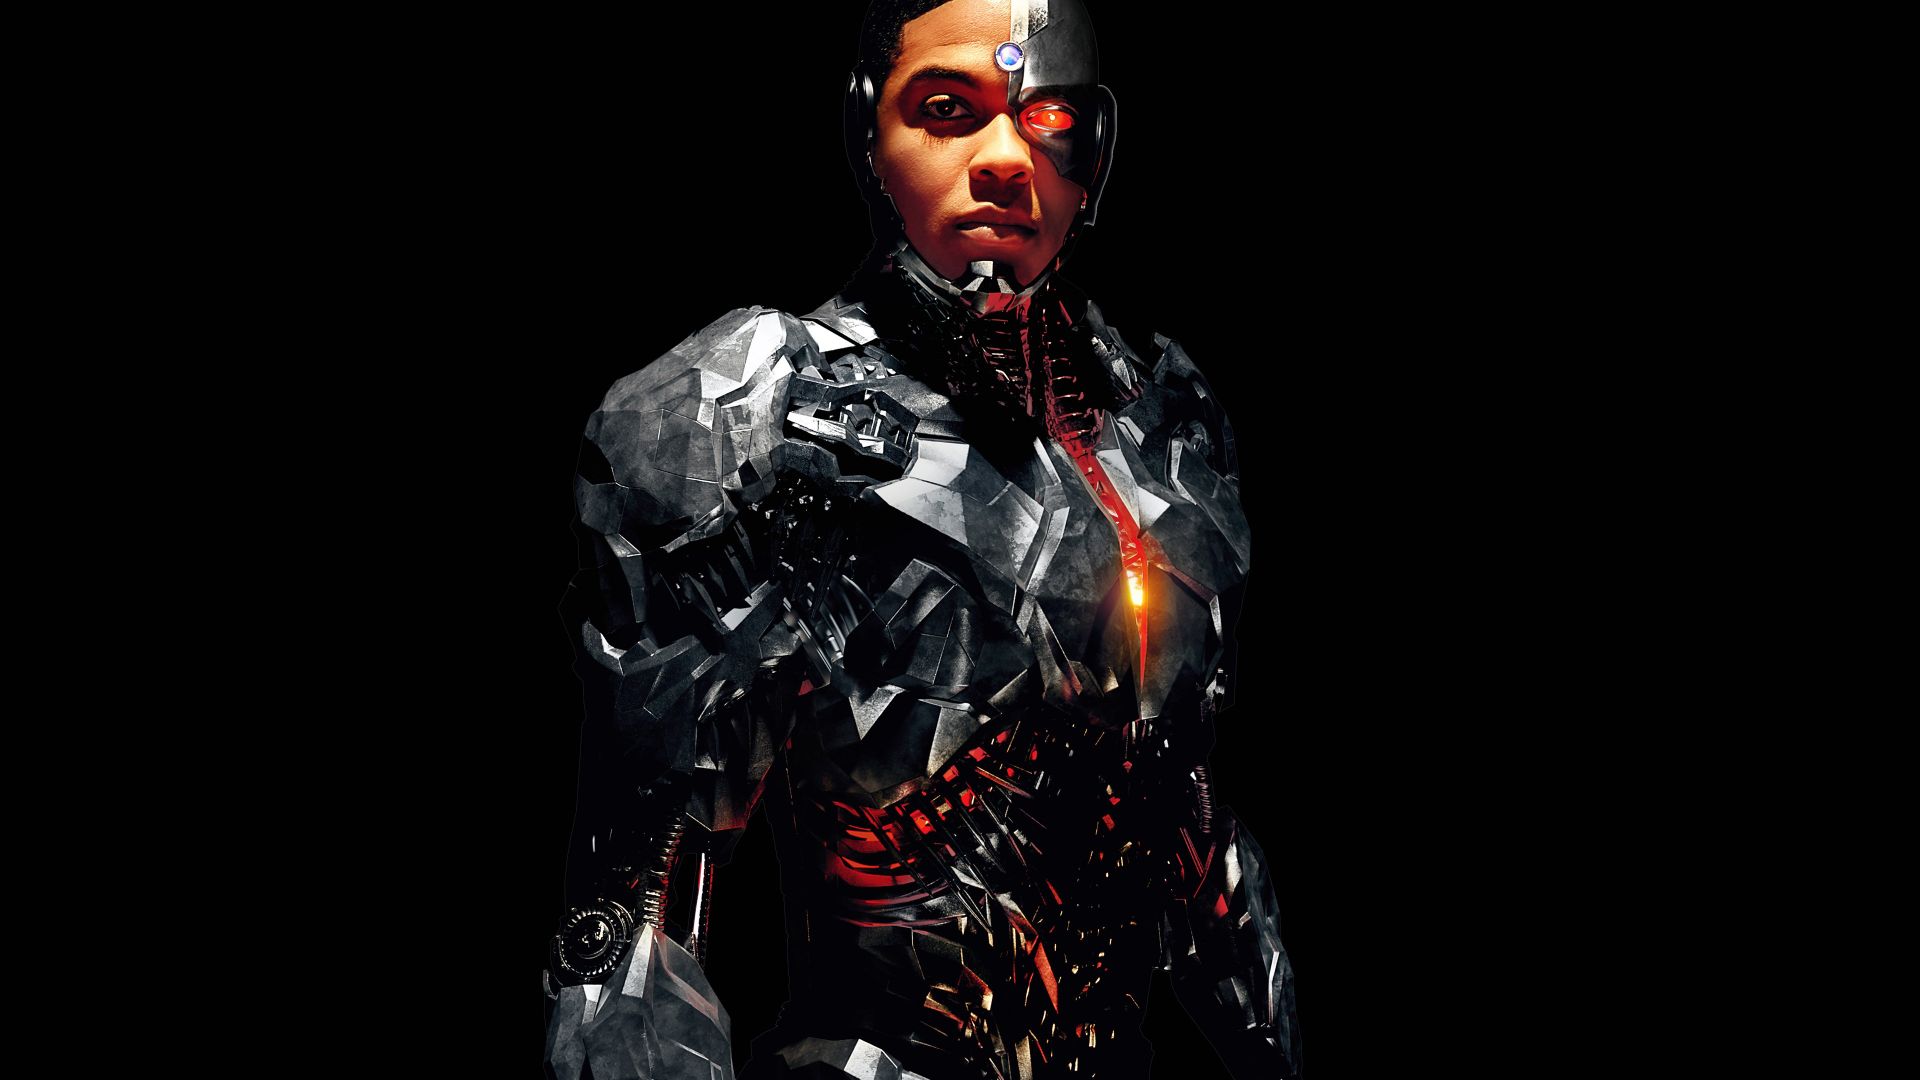 Justice League, Cyborg, Ray Fisher, 4k (horizontal)